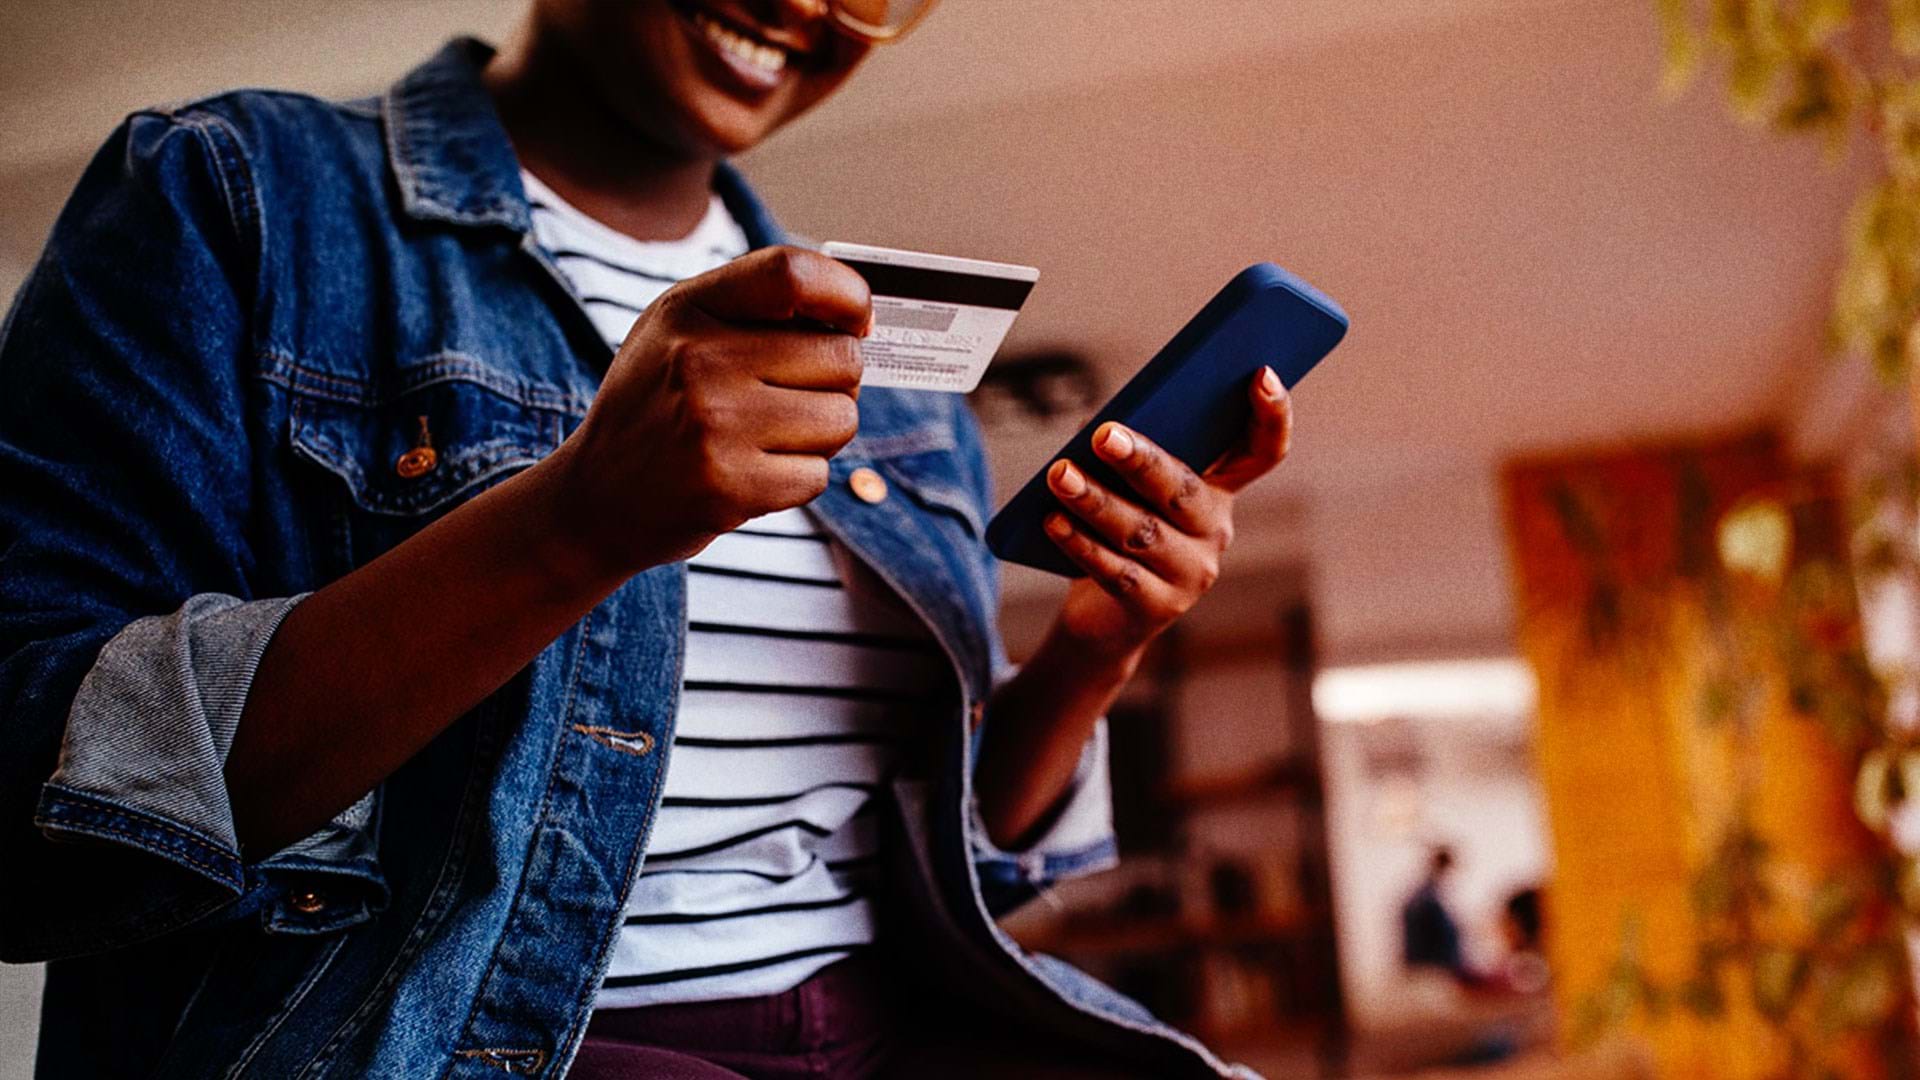 Woman shopping online with credit card and phone in hands